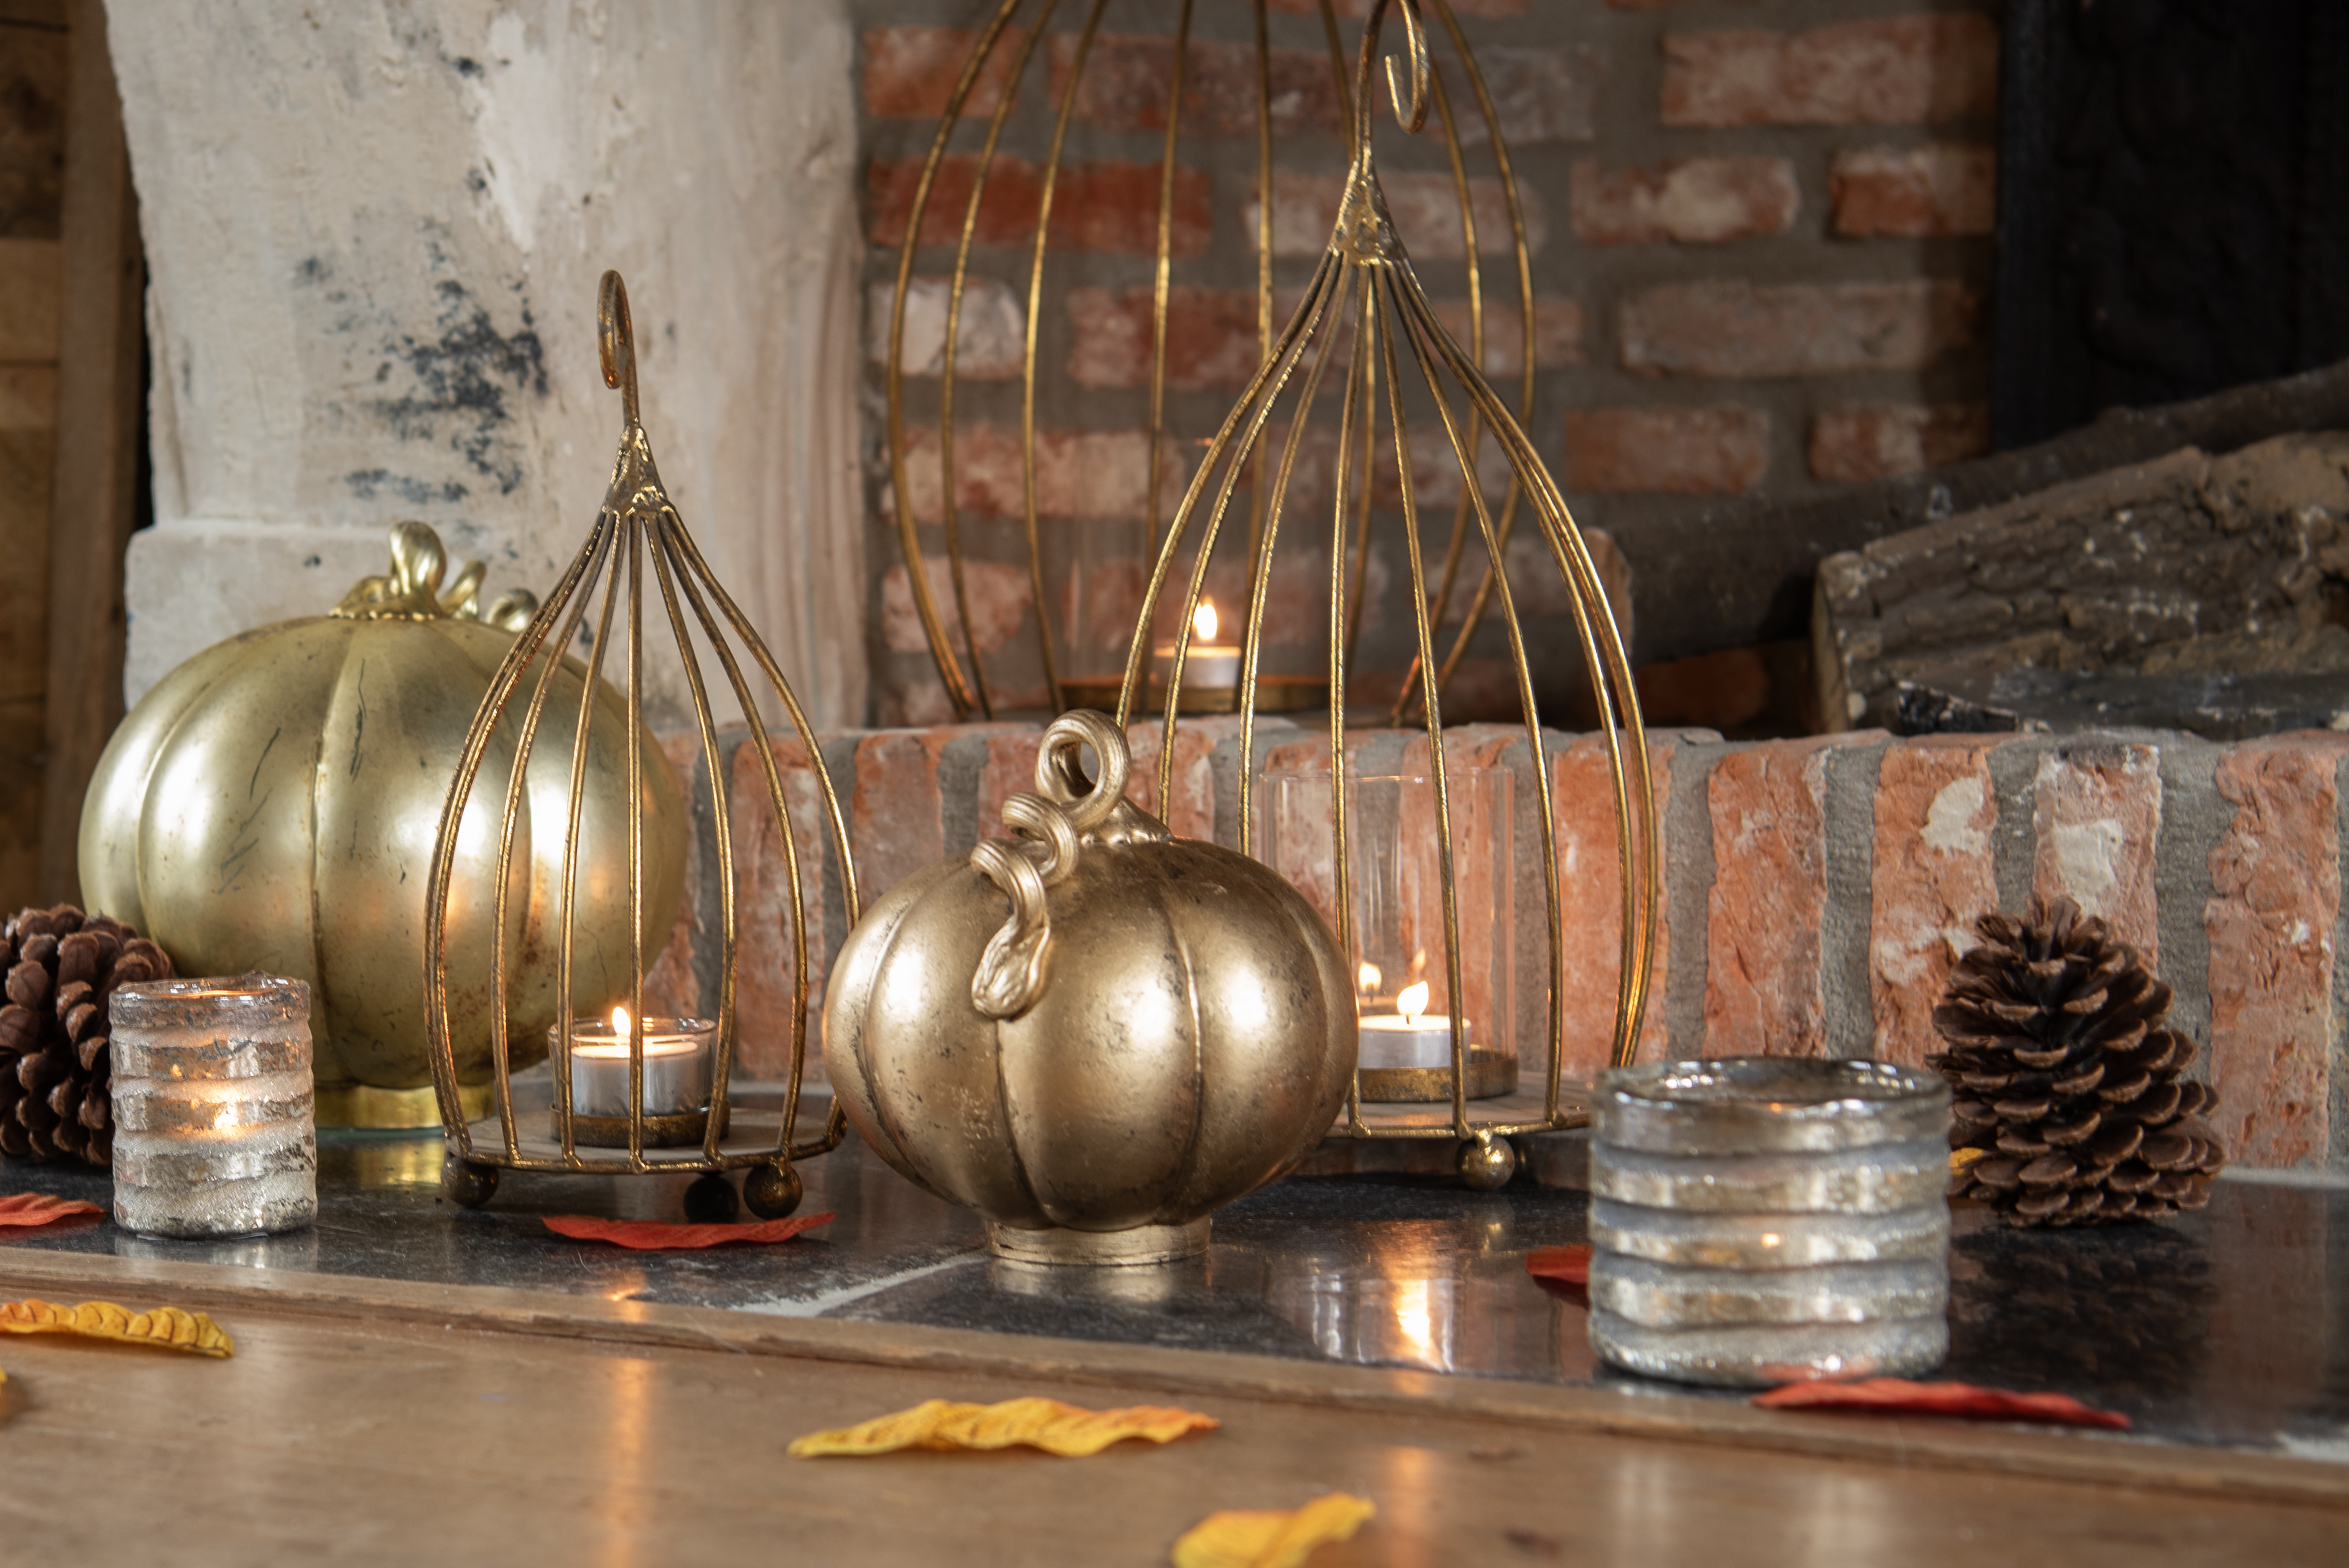 A cozy and warm autumn or Halloween decoration on a wooden table or mantle, against a backdrop of a brick wall with visible traces of peeling plaster. Central to the setting is a large, metal pumpkin with a rich golden hue, along with a smaller, similarly designed pumpkin. Both pumpkins have a polished surface that softly reflects the light from the surrounding candles.

On the left side of the composition is a metal candle holder with an open structure, allowing the light from the burning candles to spread atmospherically throughout the space. Another similar candle holder is visible on the right, and both contribute to the warm glow of the setting.

Scattered across the table are small silver candle holders with burning candles inside, enhancing the overall coziness. Natural elements such as pinecones and autumn leaves with rich red and gold tones have also been added to the decoration, strengthening the association with autumn and adding a sense of natural beauty to the whole setup.